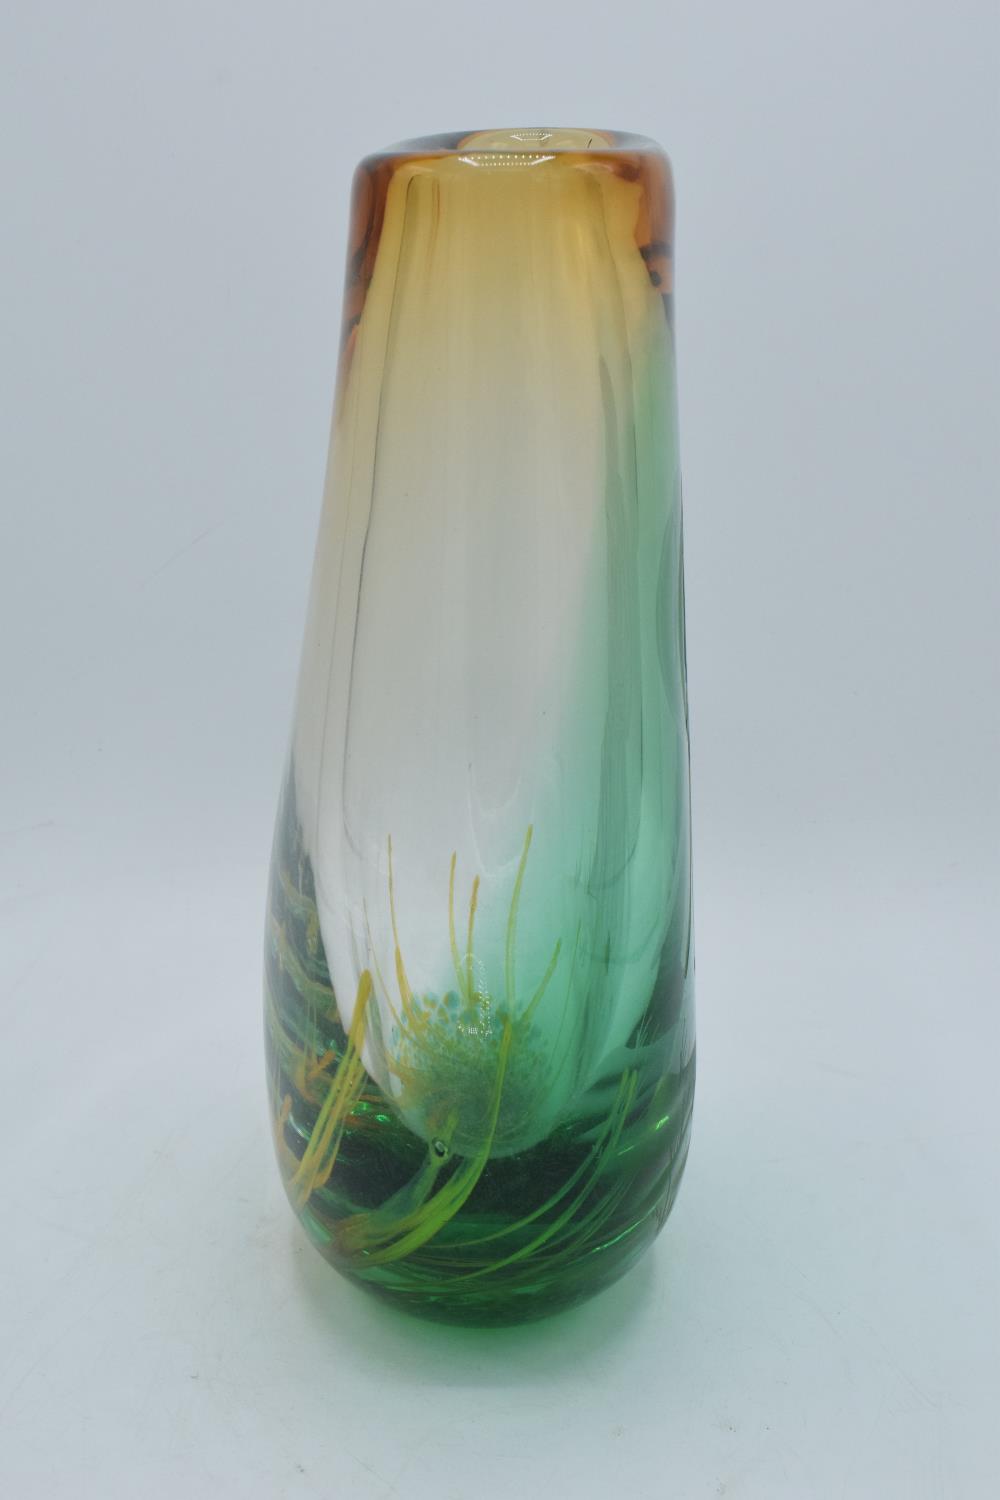 Caithness one-off glass vase 'Highlander' 2002, signed to base by the artist. 27cm tall. - Image 4 of 10